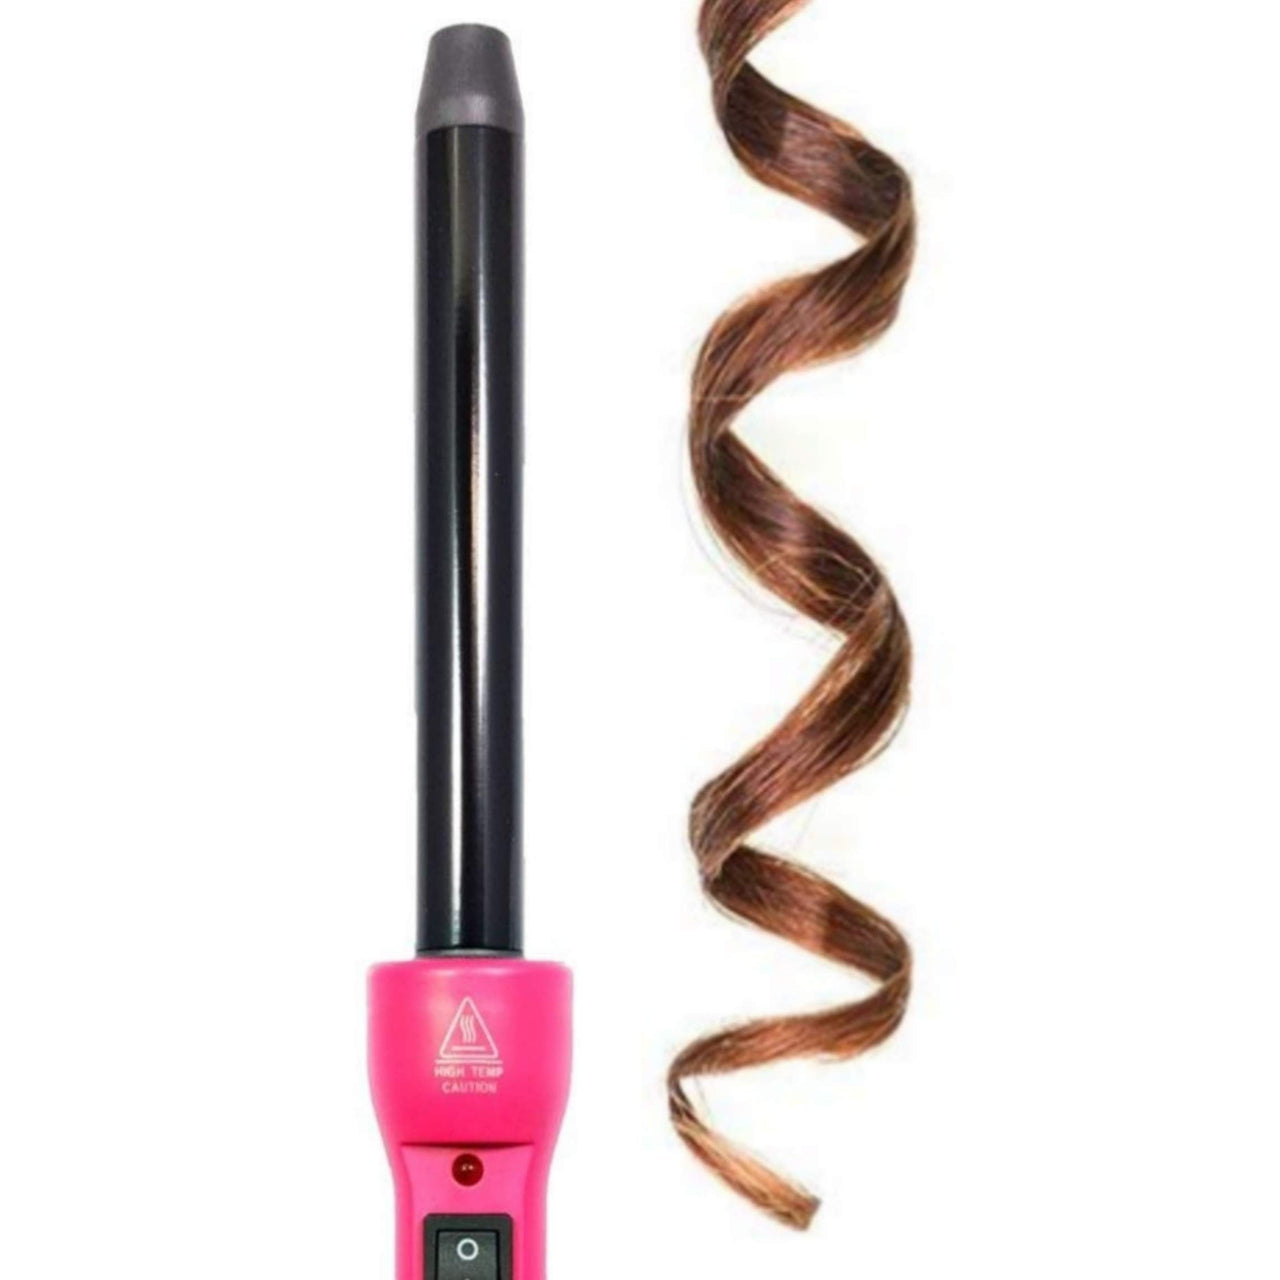 19mm Tapered Tourmaline Ceramic Cool Tip Curling Iron Clipless Hair Twister With Protective Glove Pink Black